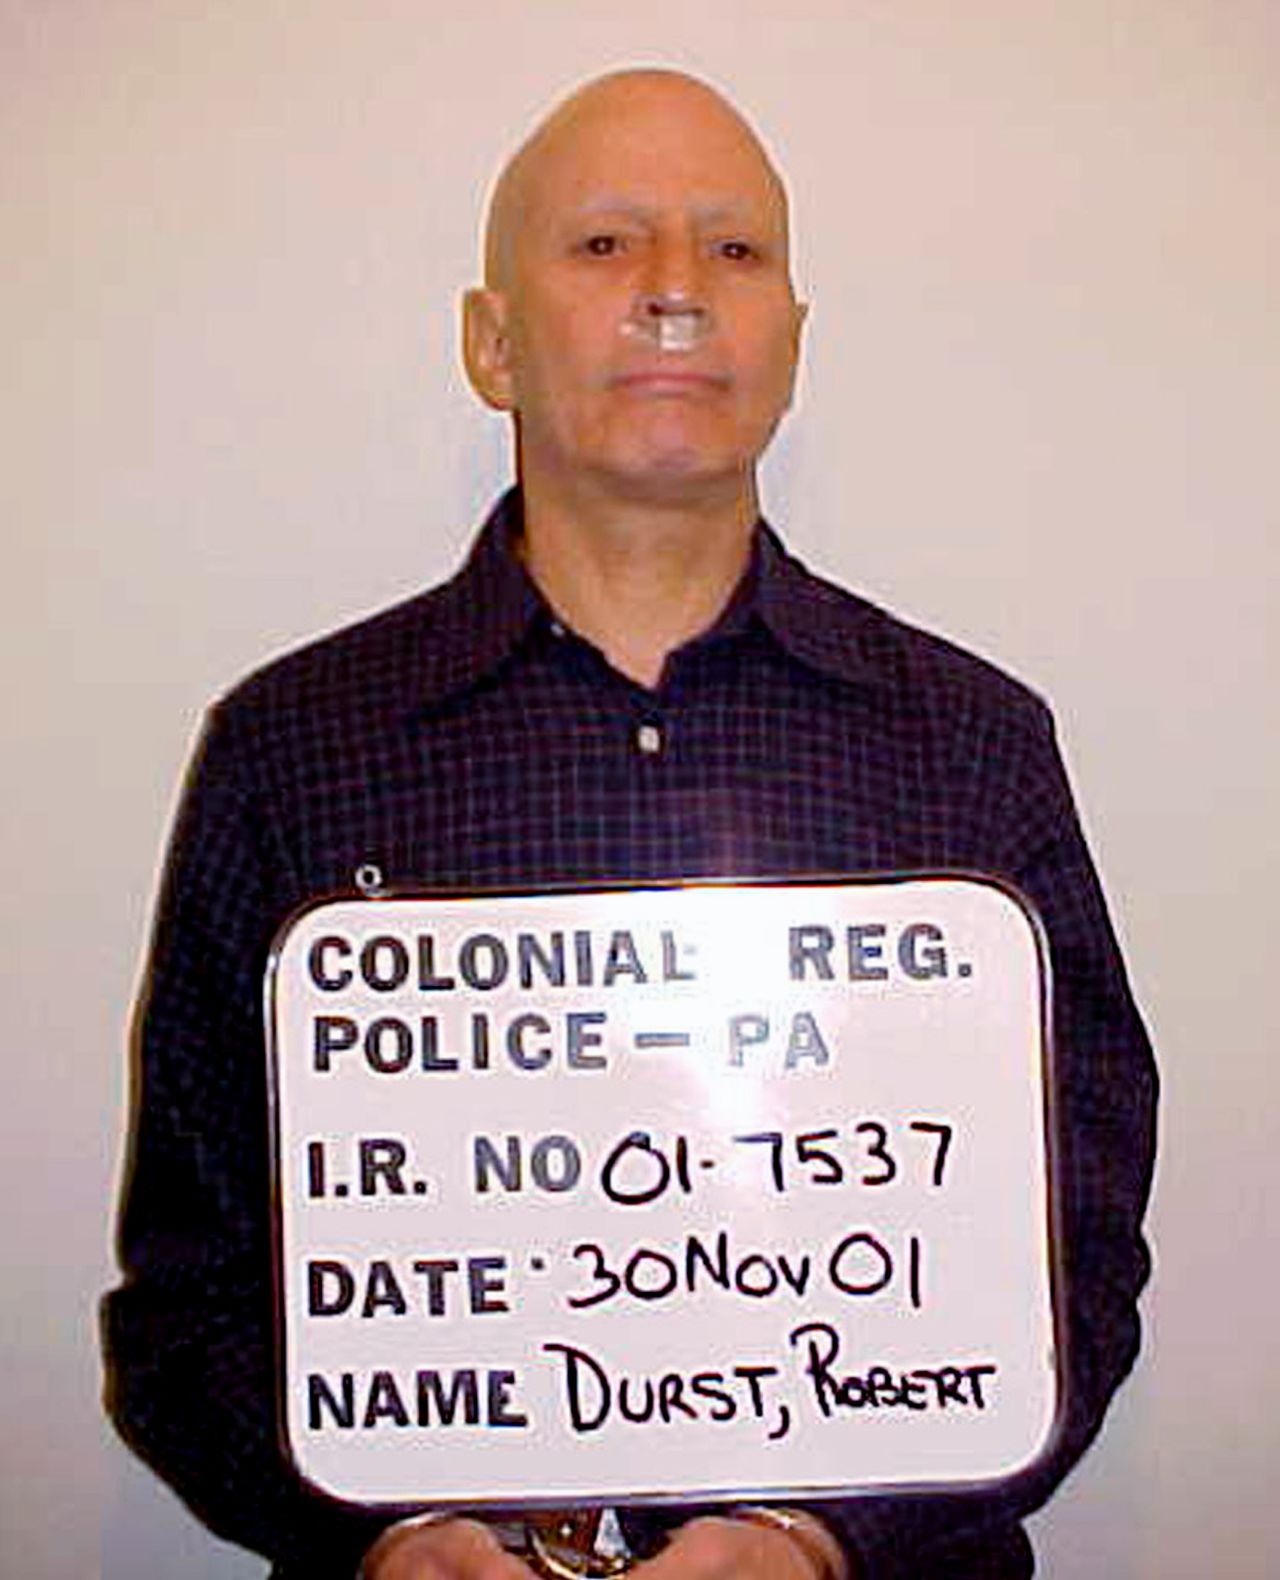 Durst is seen in this November 2001 booking photo after he jumped bail and was arrested in Pennsylvania. Durst was arrested for shoplifting a sandwich even though he had hundreds of dollars in his pocket.